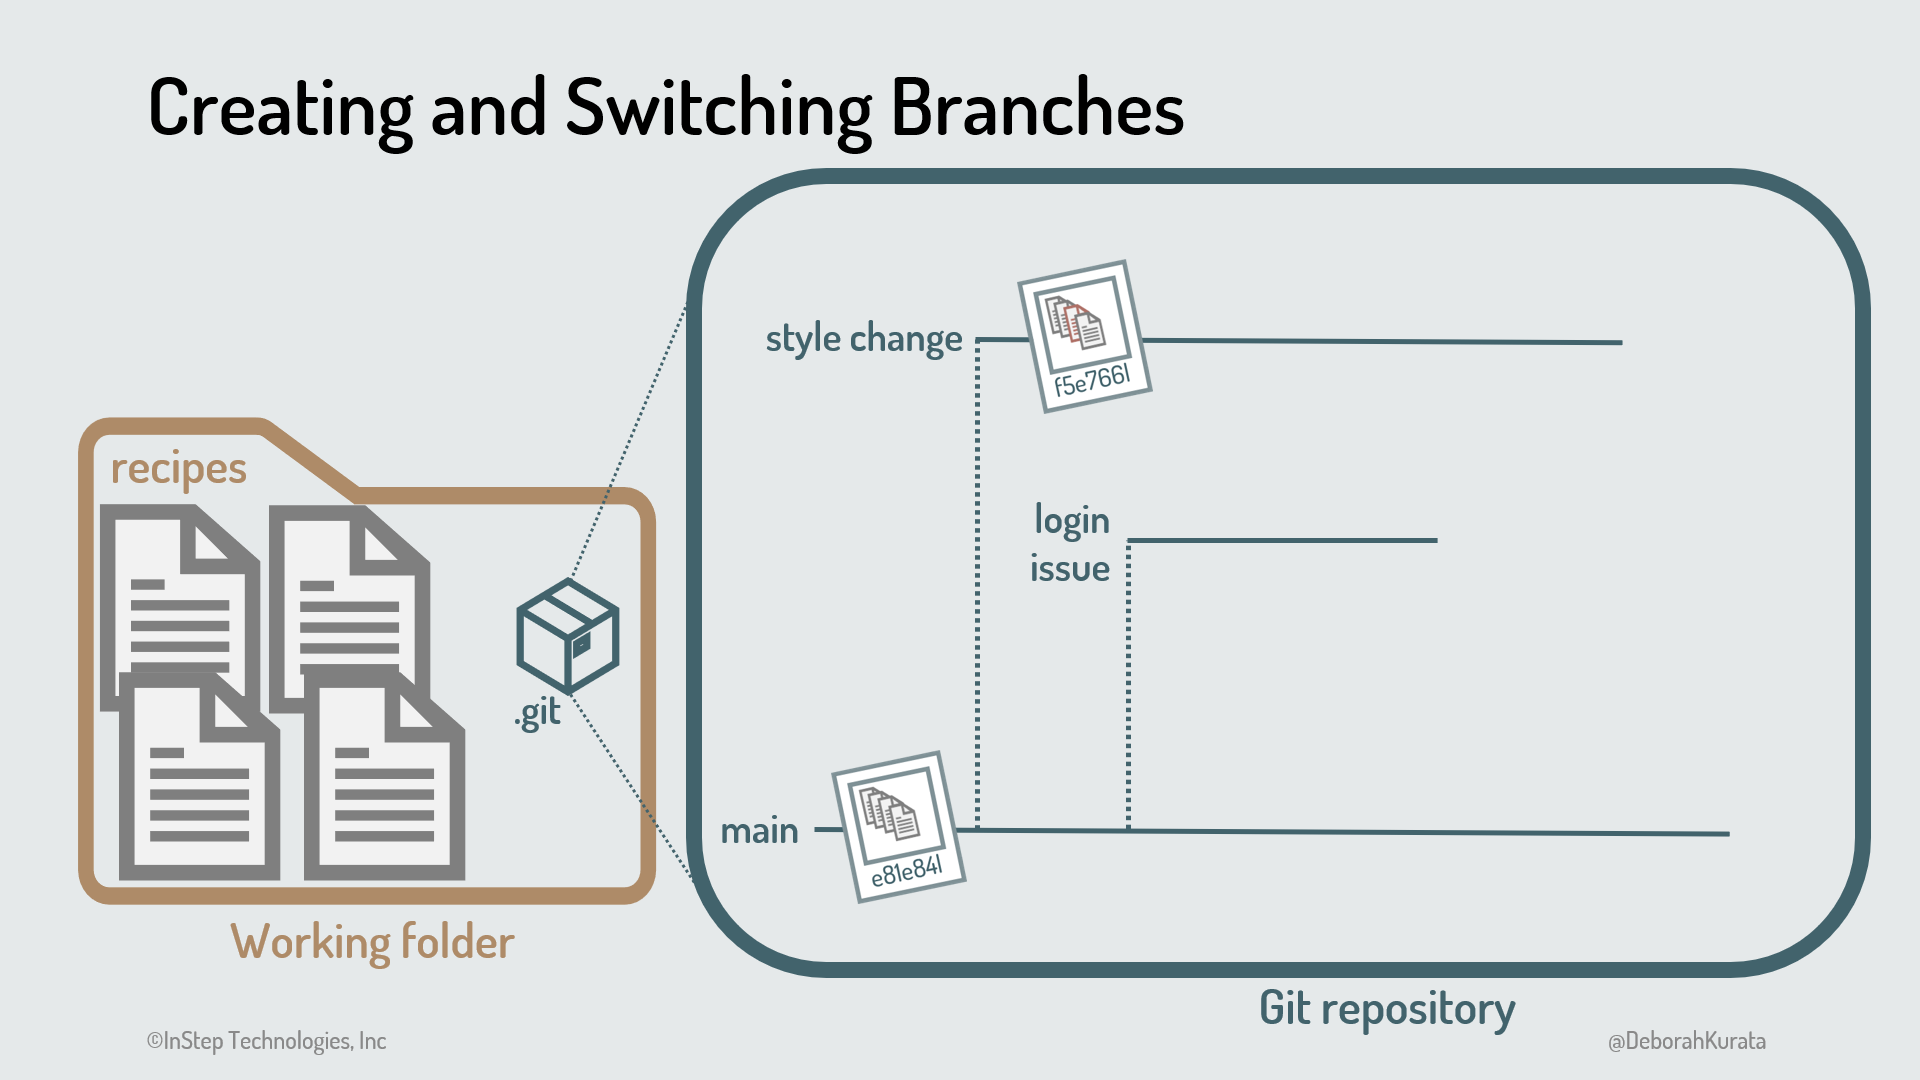 Working folder on the left. Git repository on the right showing the "login issue" branch.